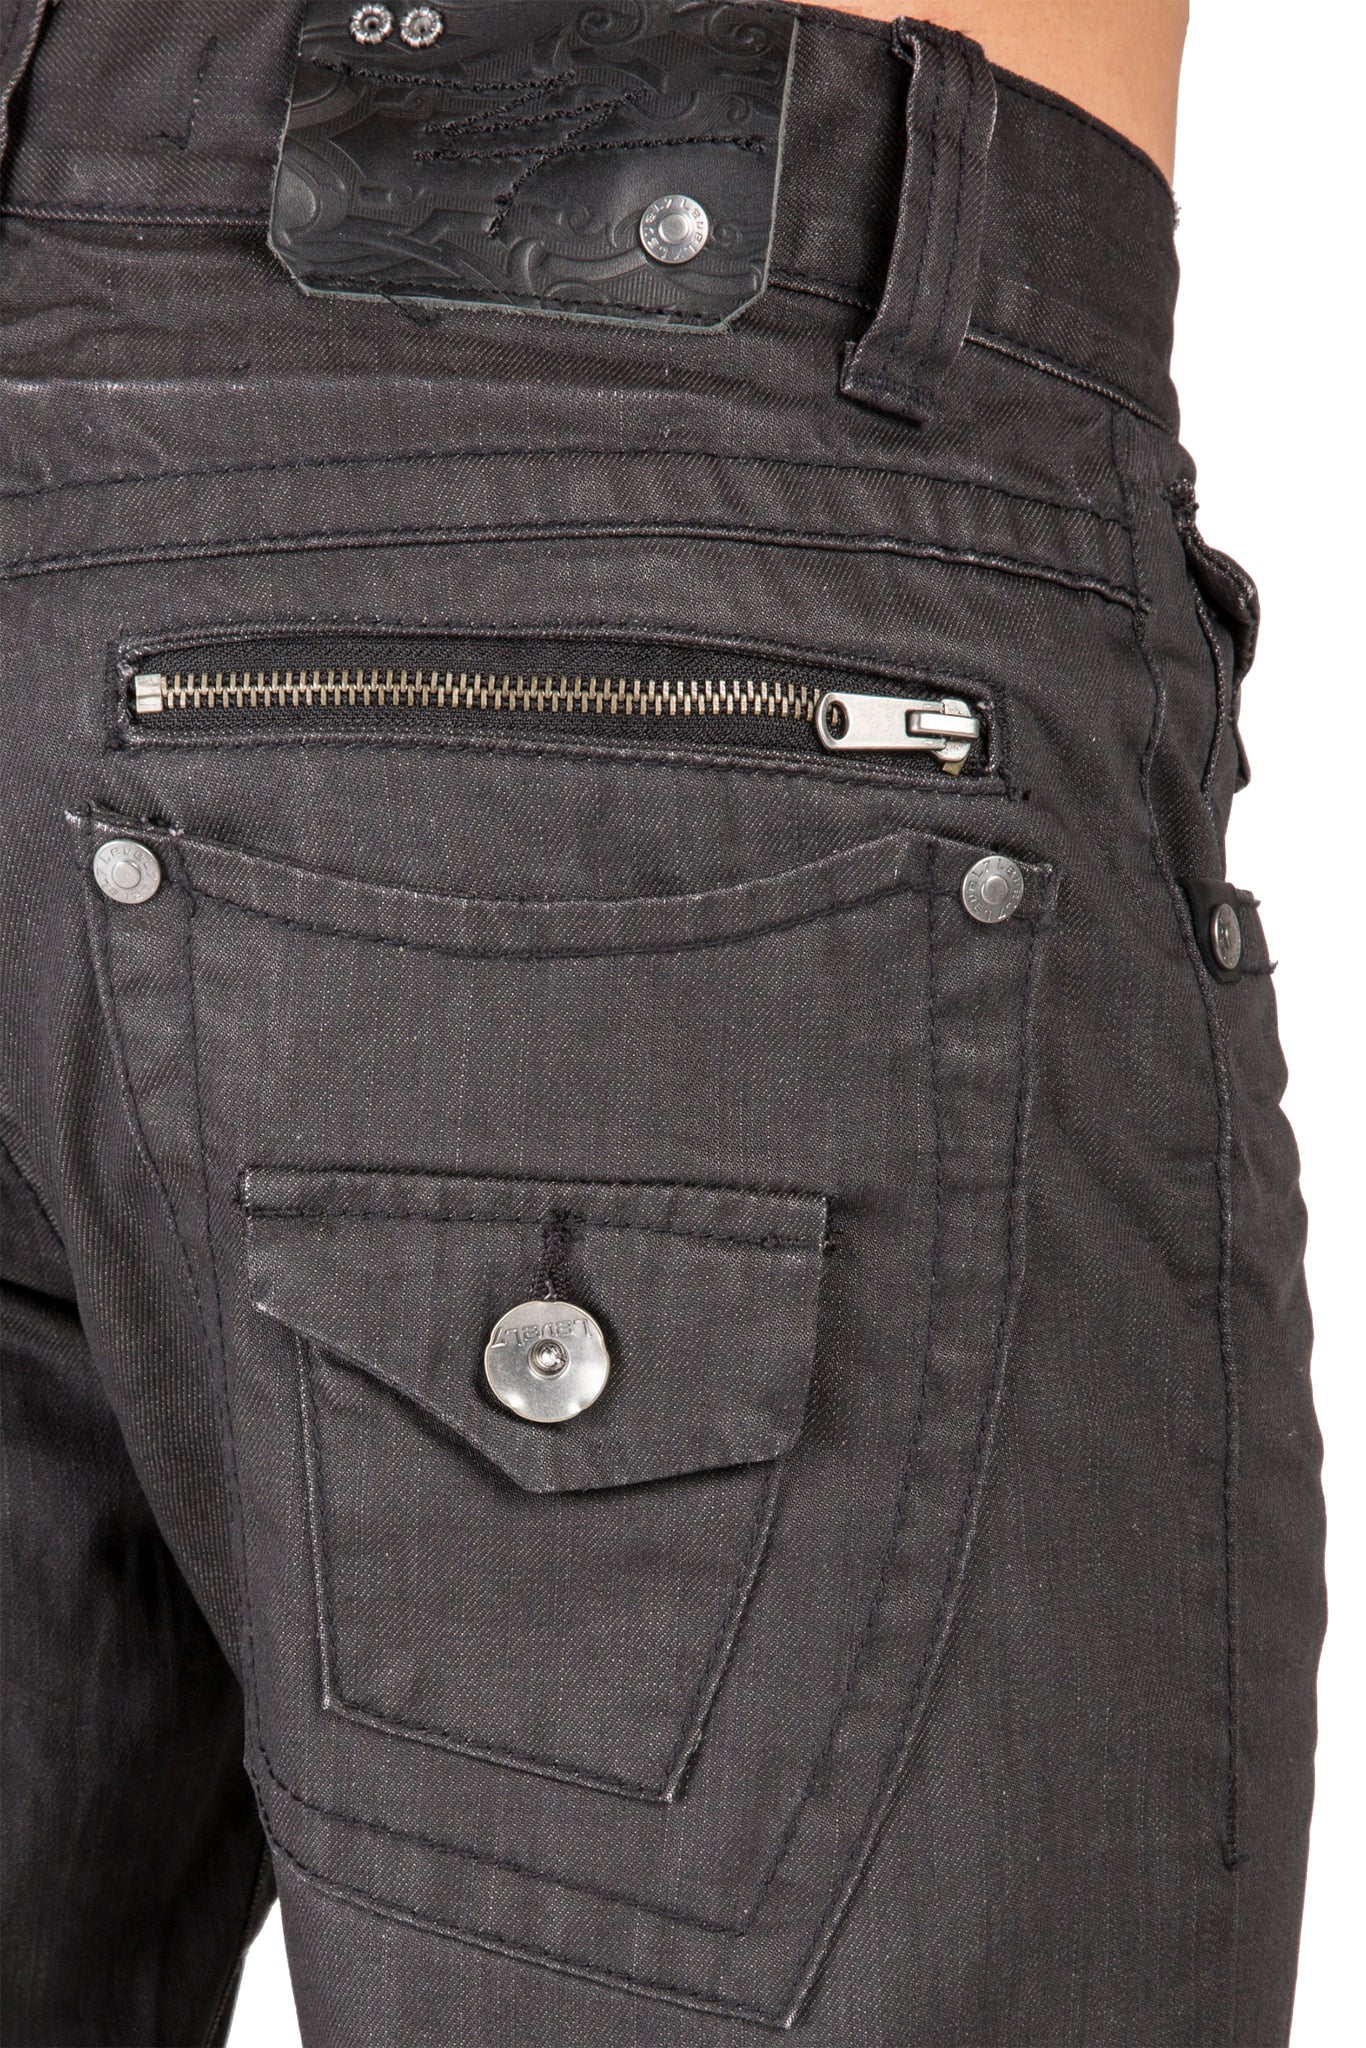 Black Premium Coated Denim Relaxed Straight Jeans Throwback Style Zipper Trim Pockets